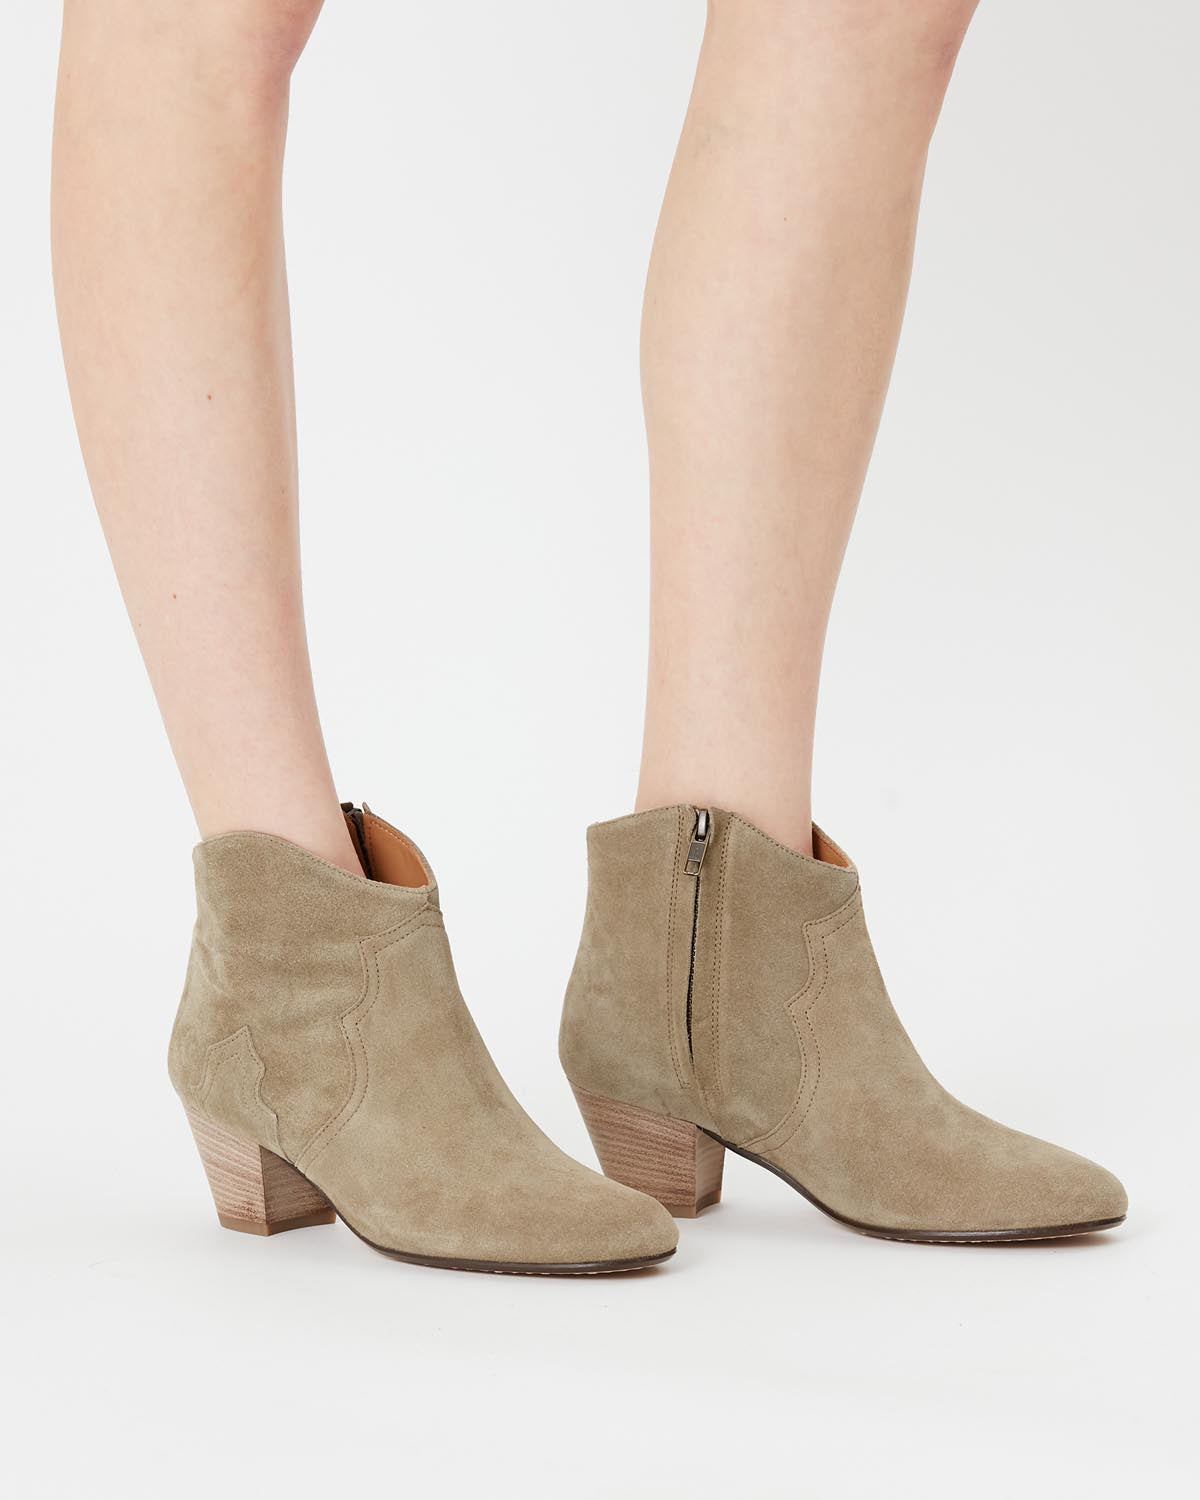 Boots dicker Woman Taupe 2